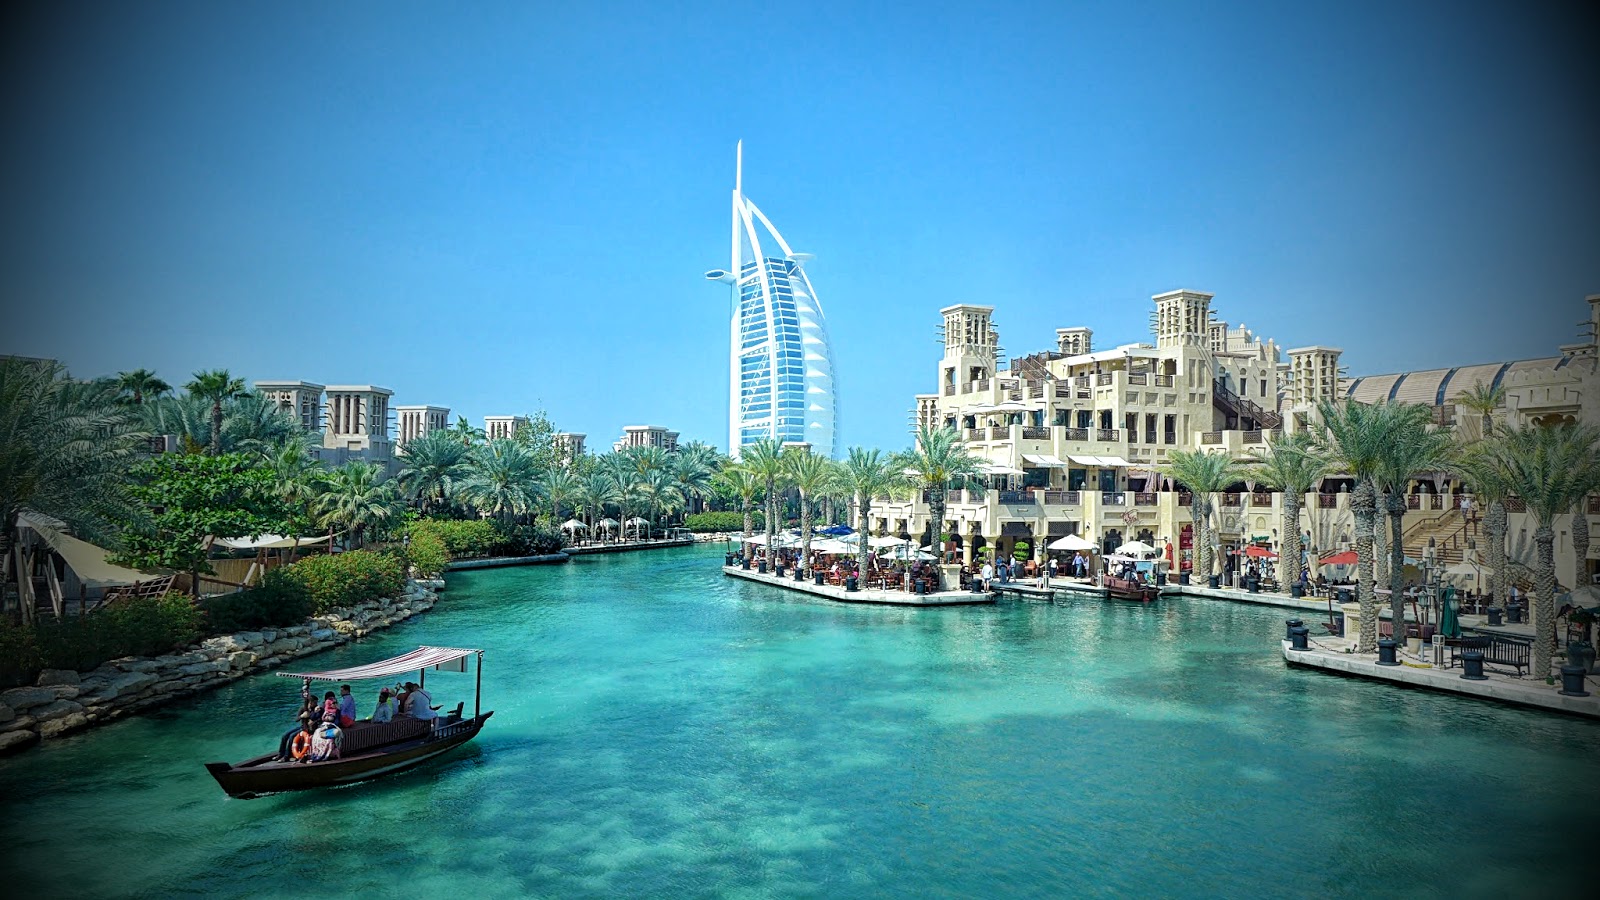 AUDREY TO MINA A'SALAM MADINAT JUMEIRAH - A MAGNIFICENT HOTEL - THE ARRIVE TO THE HOTEL